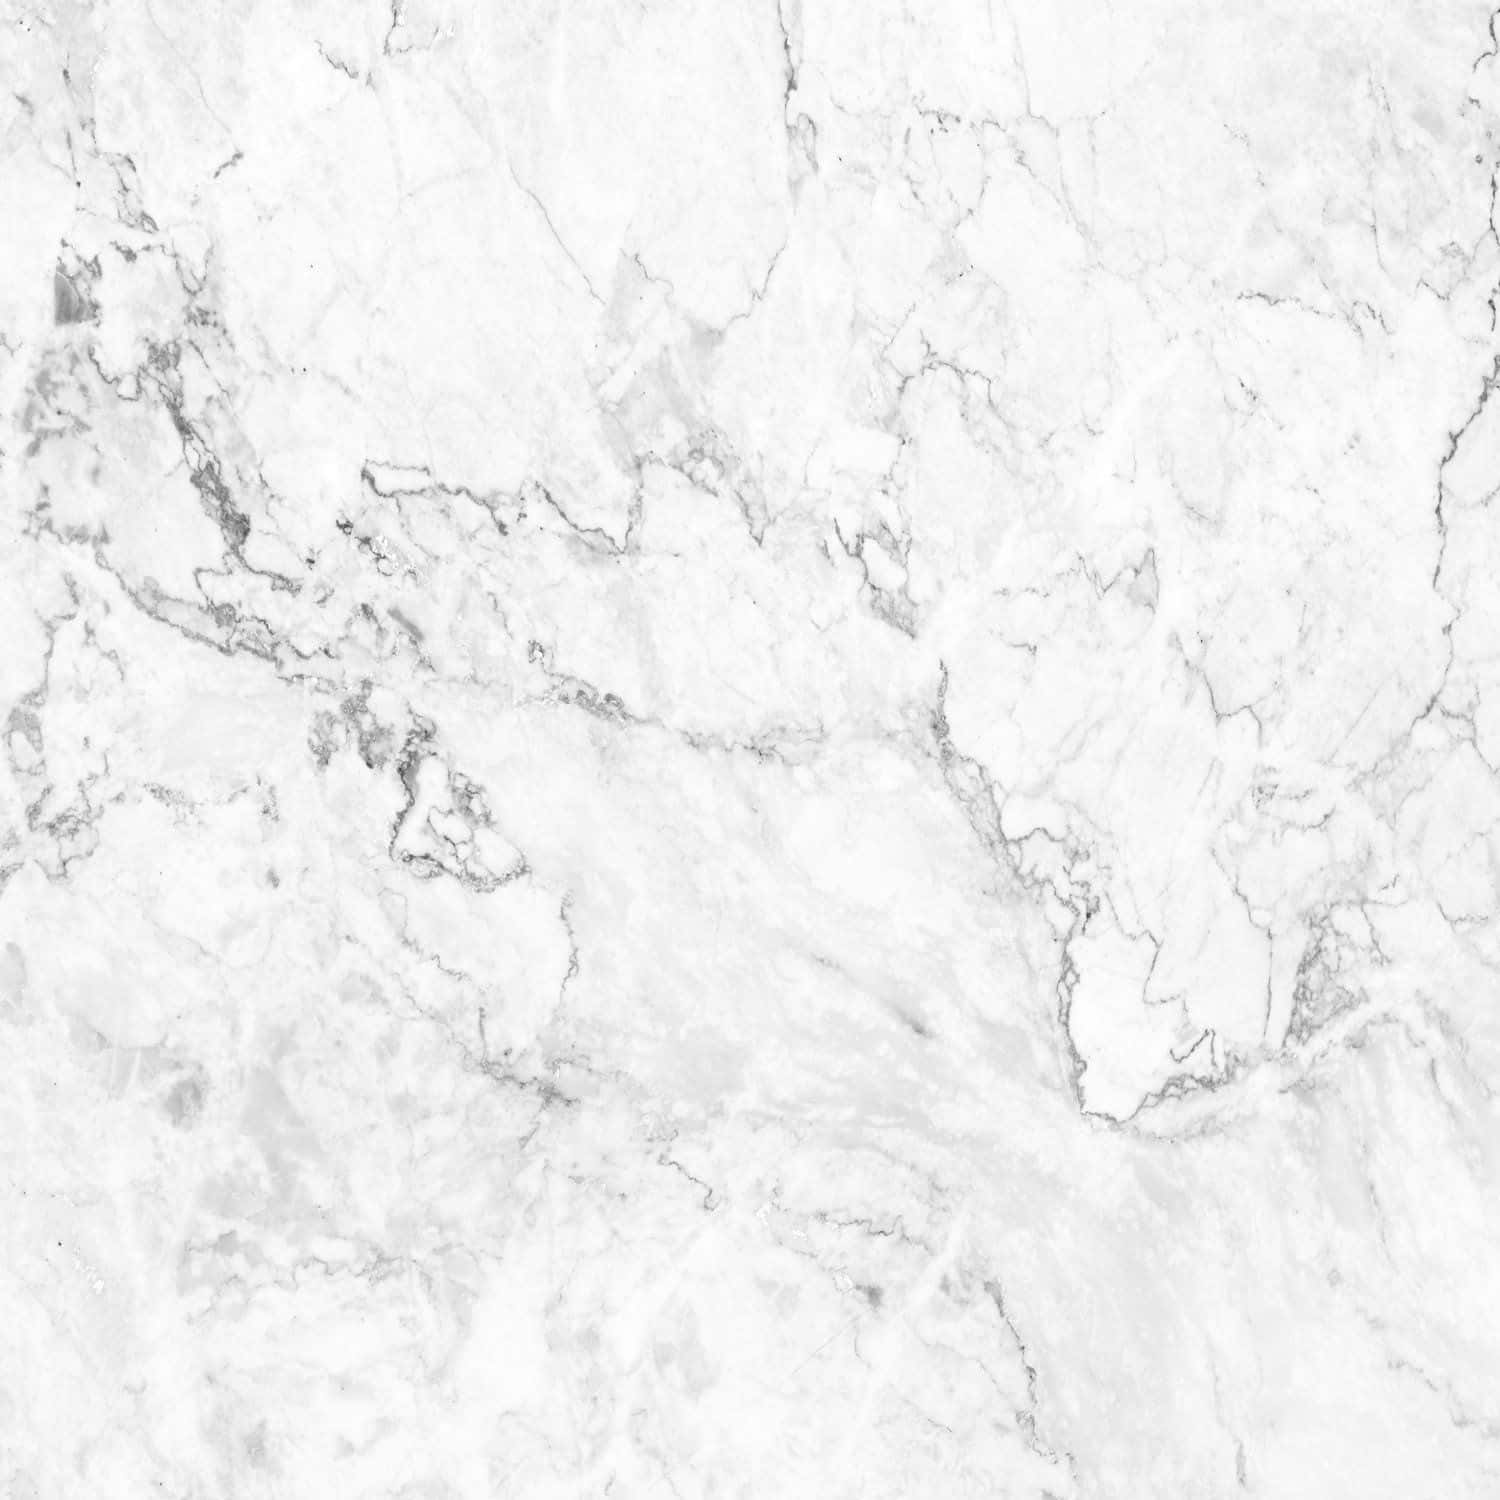 Aesthetic Gray Marble Background Creates A Stunning Visual Display Wallpaper